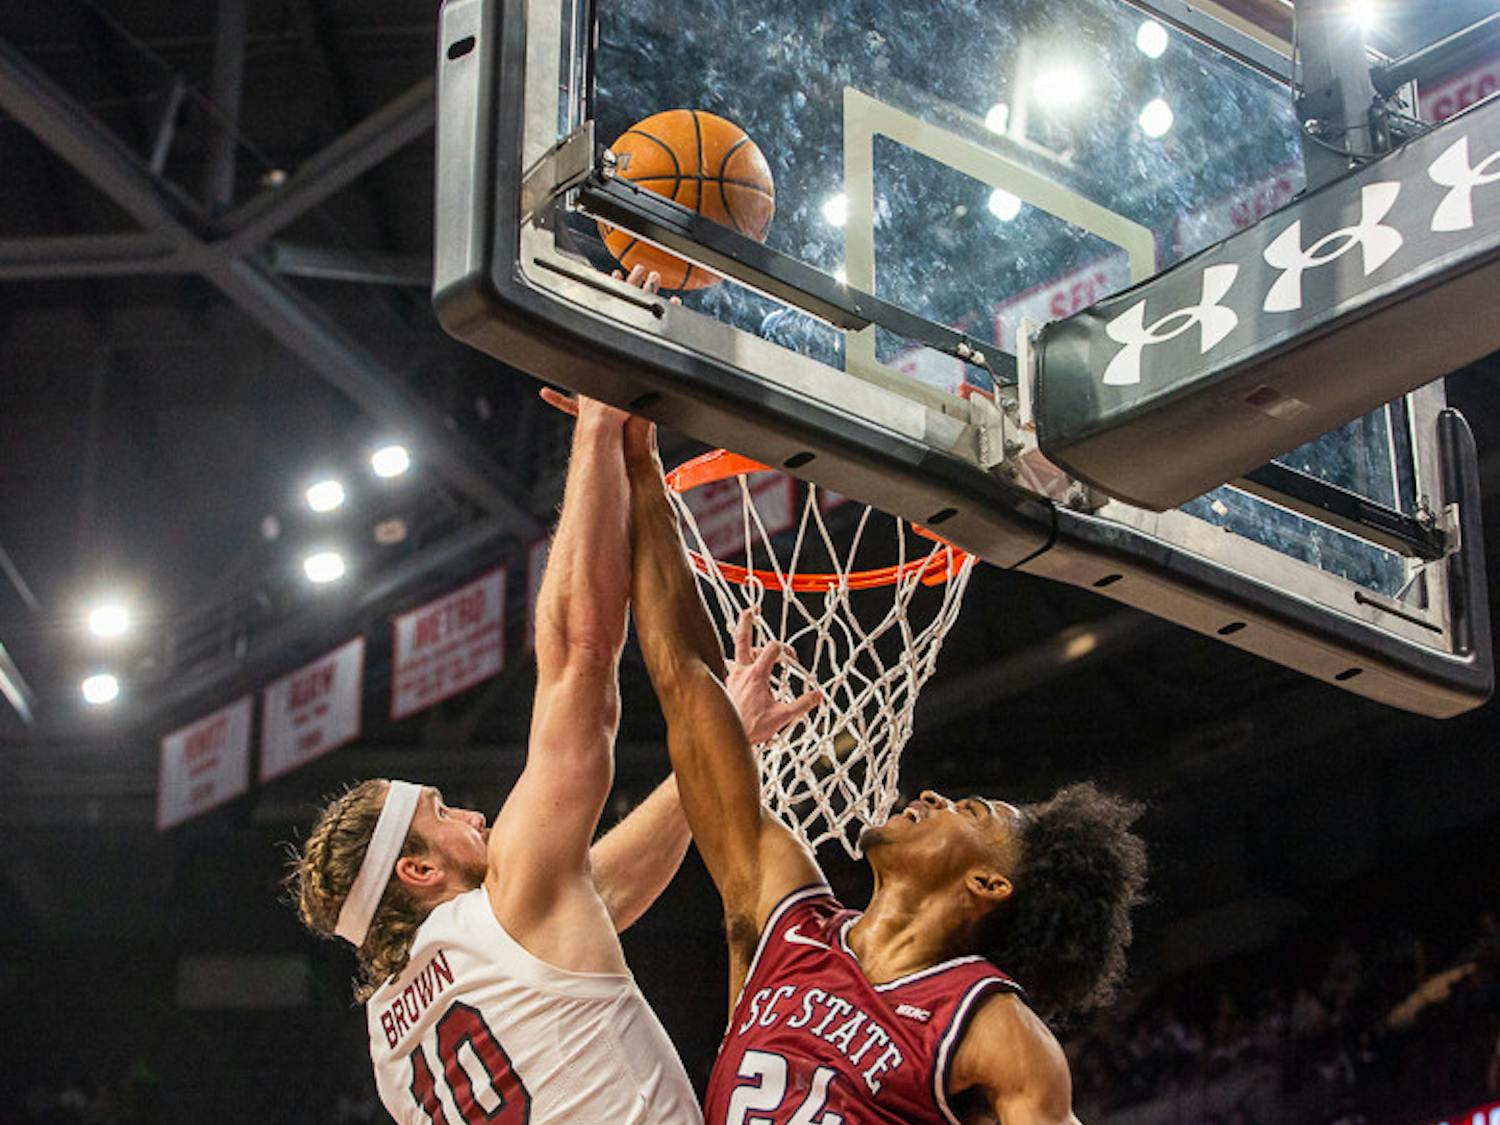 Graduate student forward Hayden Brown (on left) makes a challenge against S.C. State to get the lay-up for his team. This second-half score helped give the Gamecocks a close win over the Bulldog’s on Nov. 8, 2022.